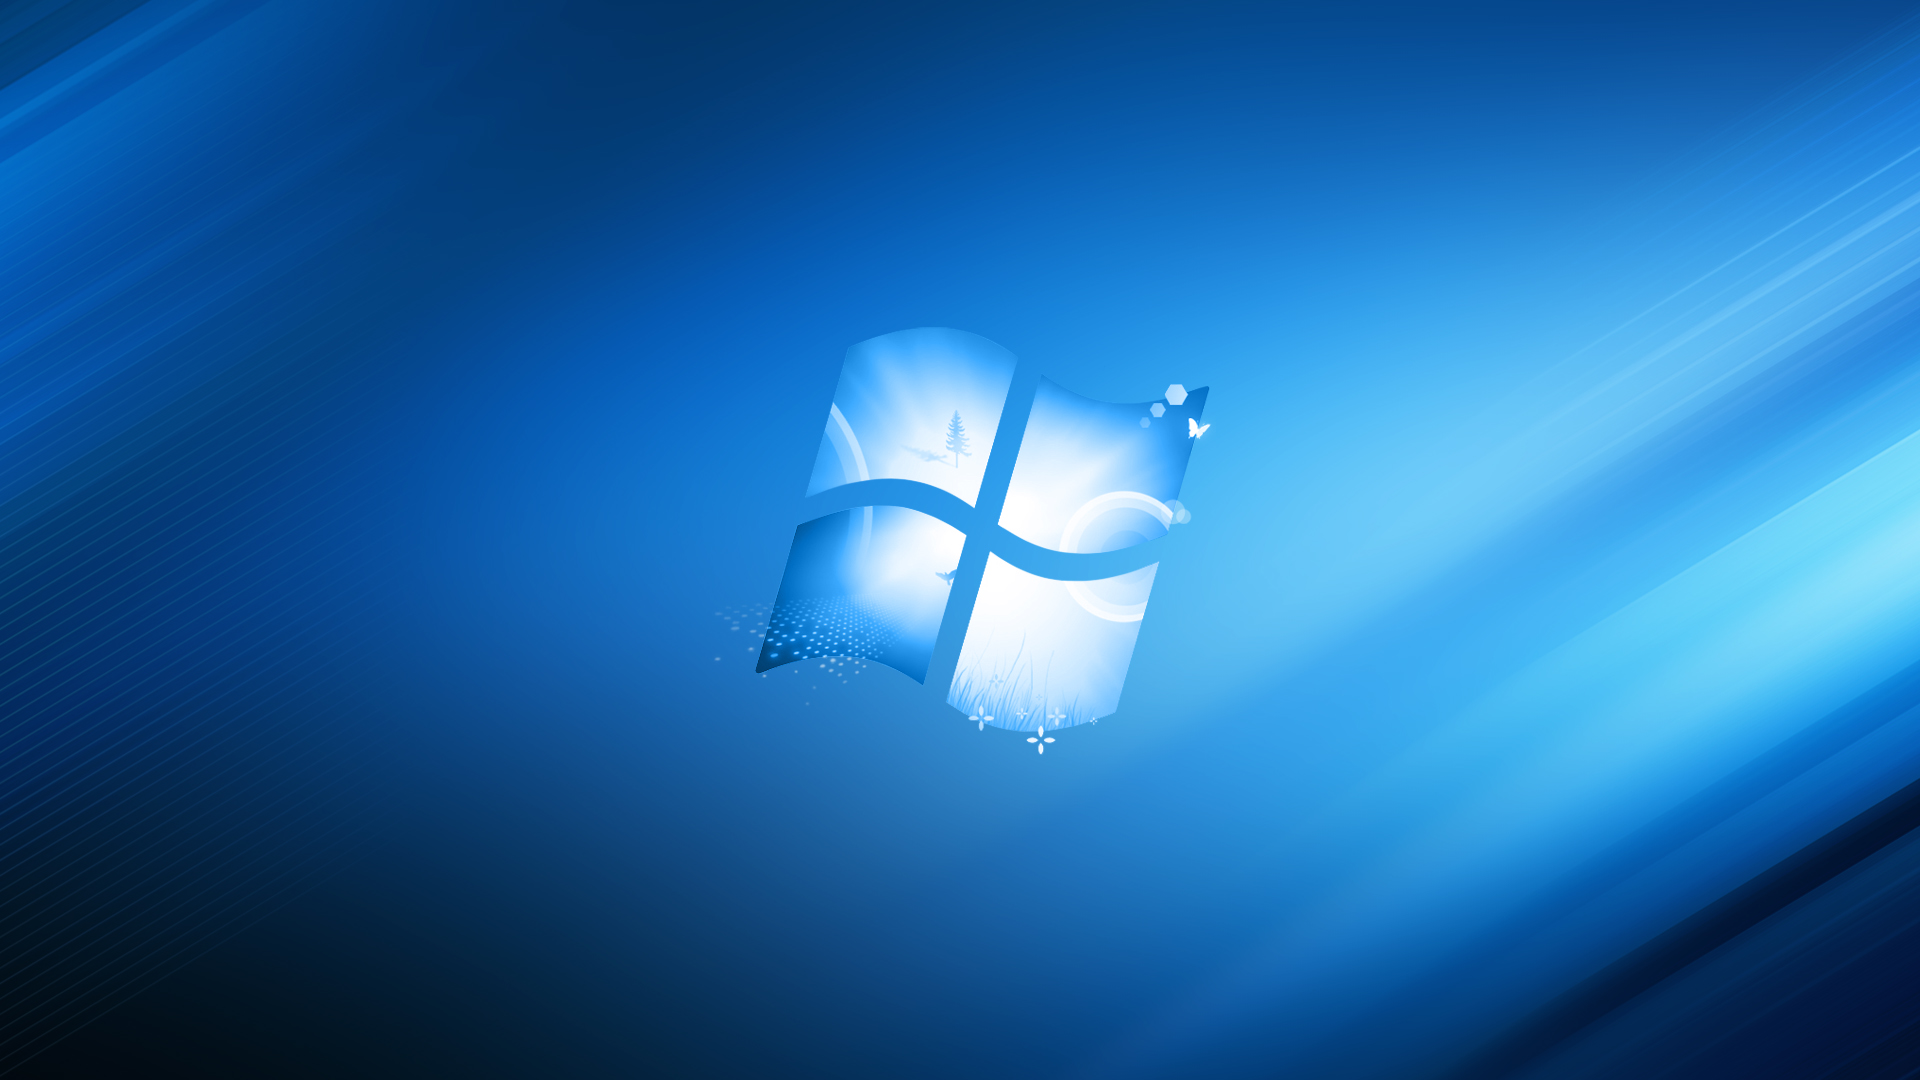 Windows 8 images Windows 8 Wallpaper 7 HD wallpaper and